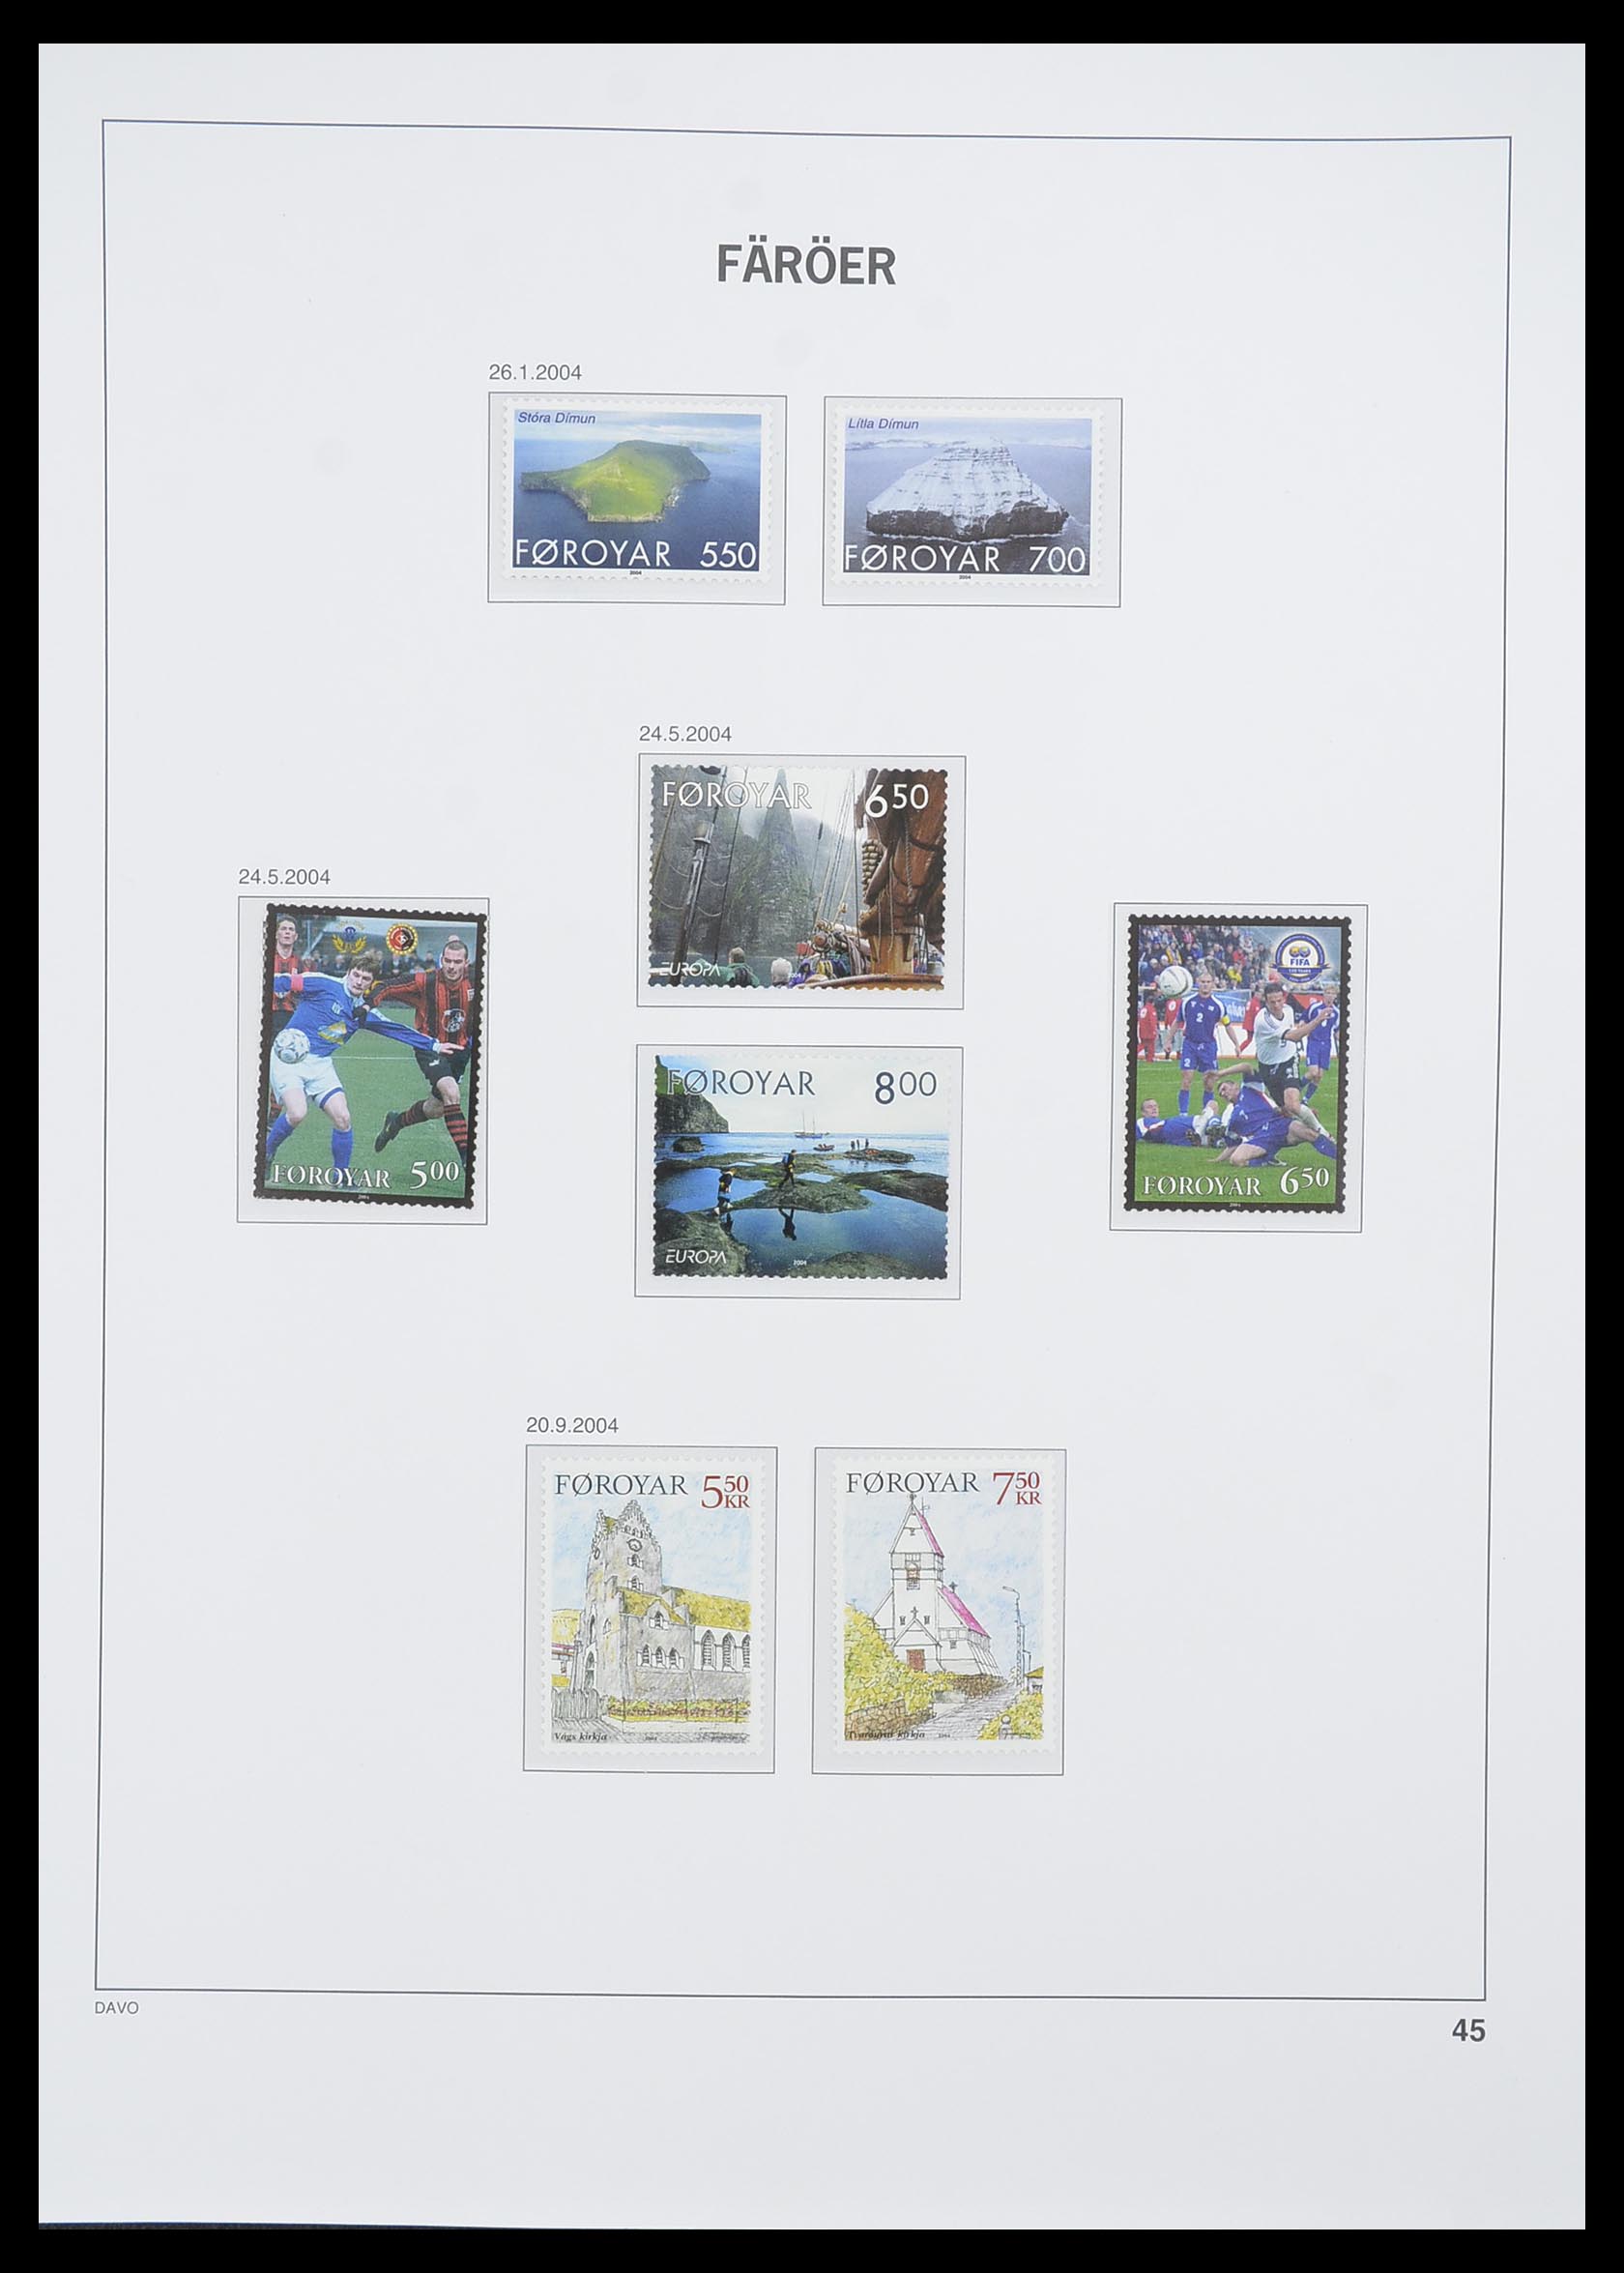 33779 045 - Stamp collection 33779 Faroe Islands 1975-20006.